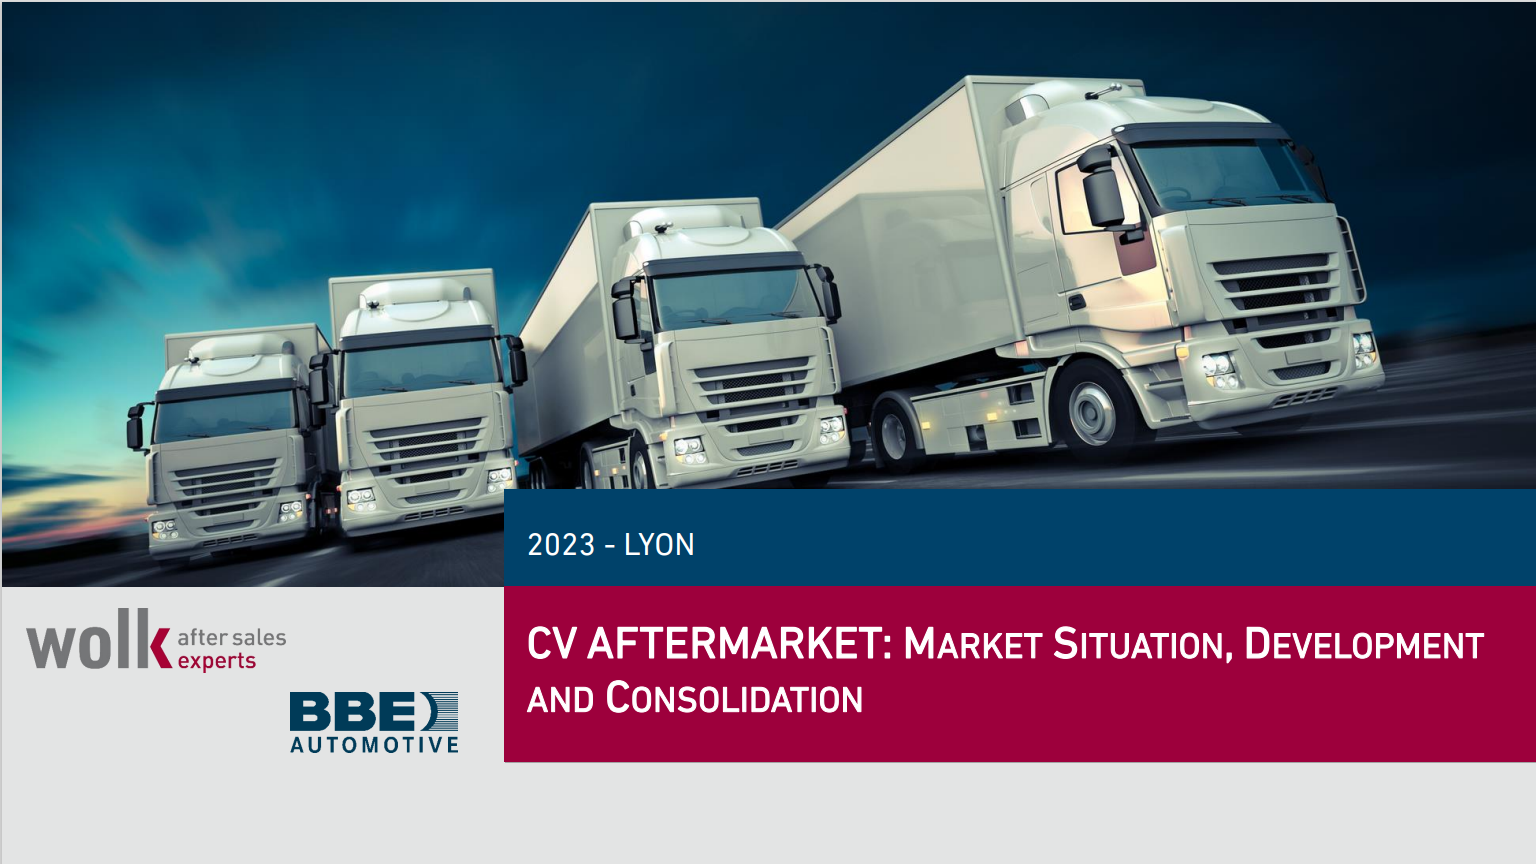 Aftermarket for commercial vehicles in Europe 2023 presentation